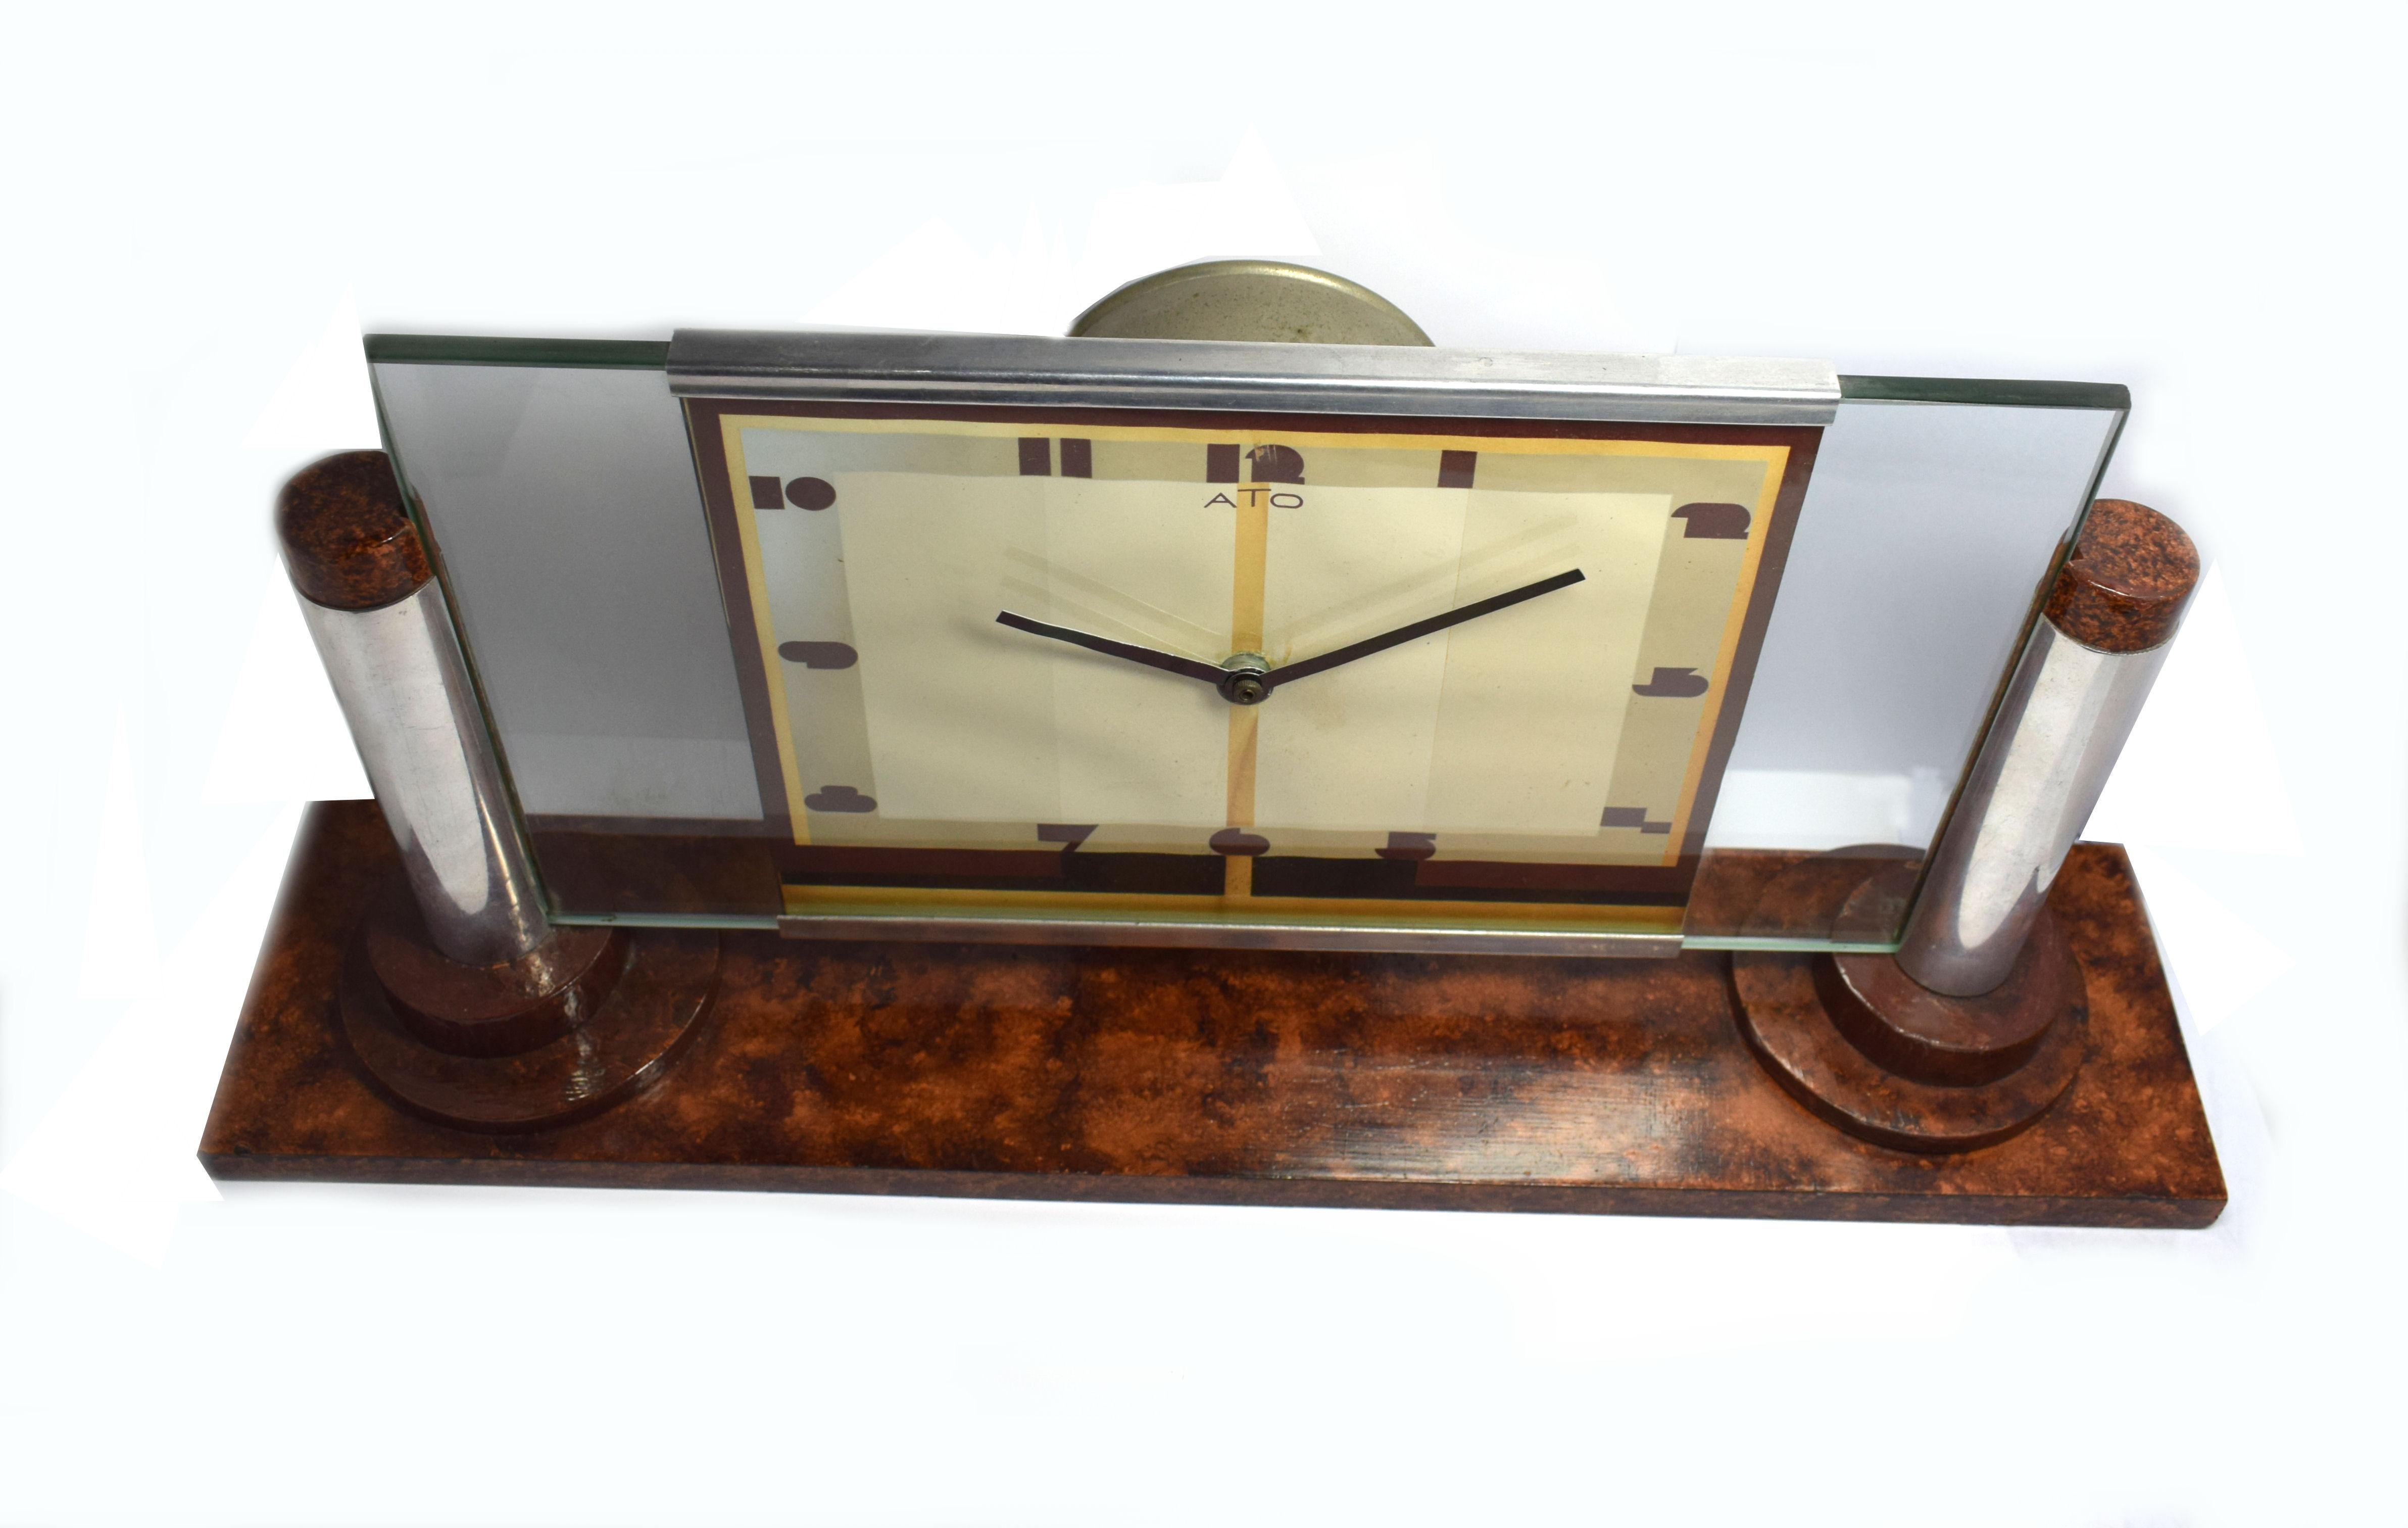 One of the more rare Art Deco clocks is this wonderfully stylish and totally authentic 1930s Art Deco clock by ATO the French clock makers. This clock has a mixtures of materials, mainly wood, chrome and glass. Very iconic looking clock that